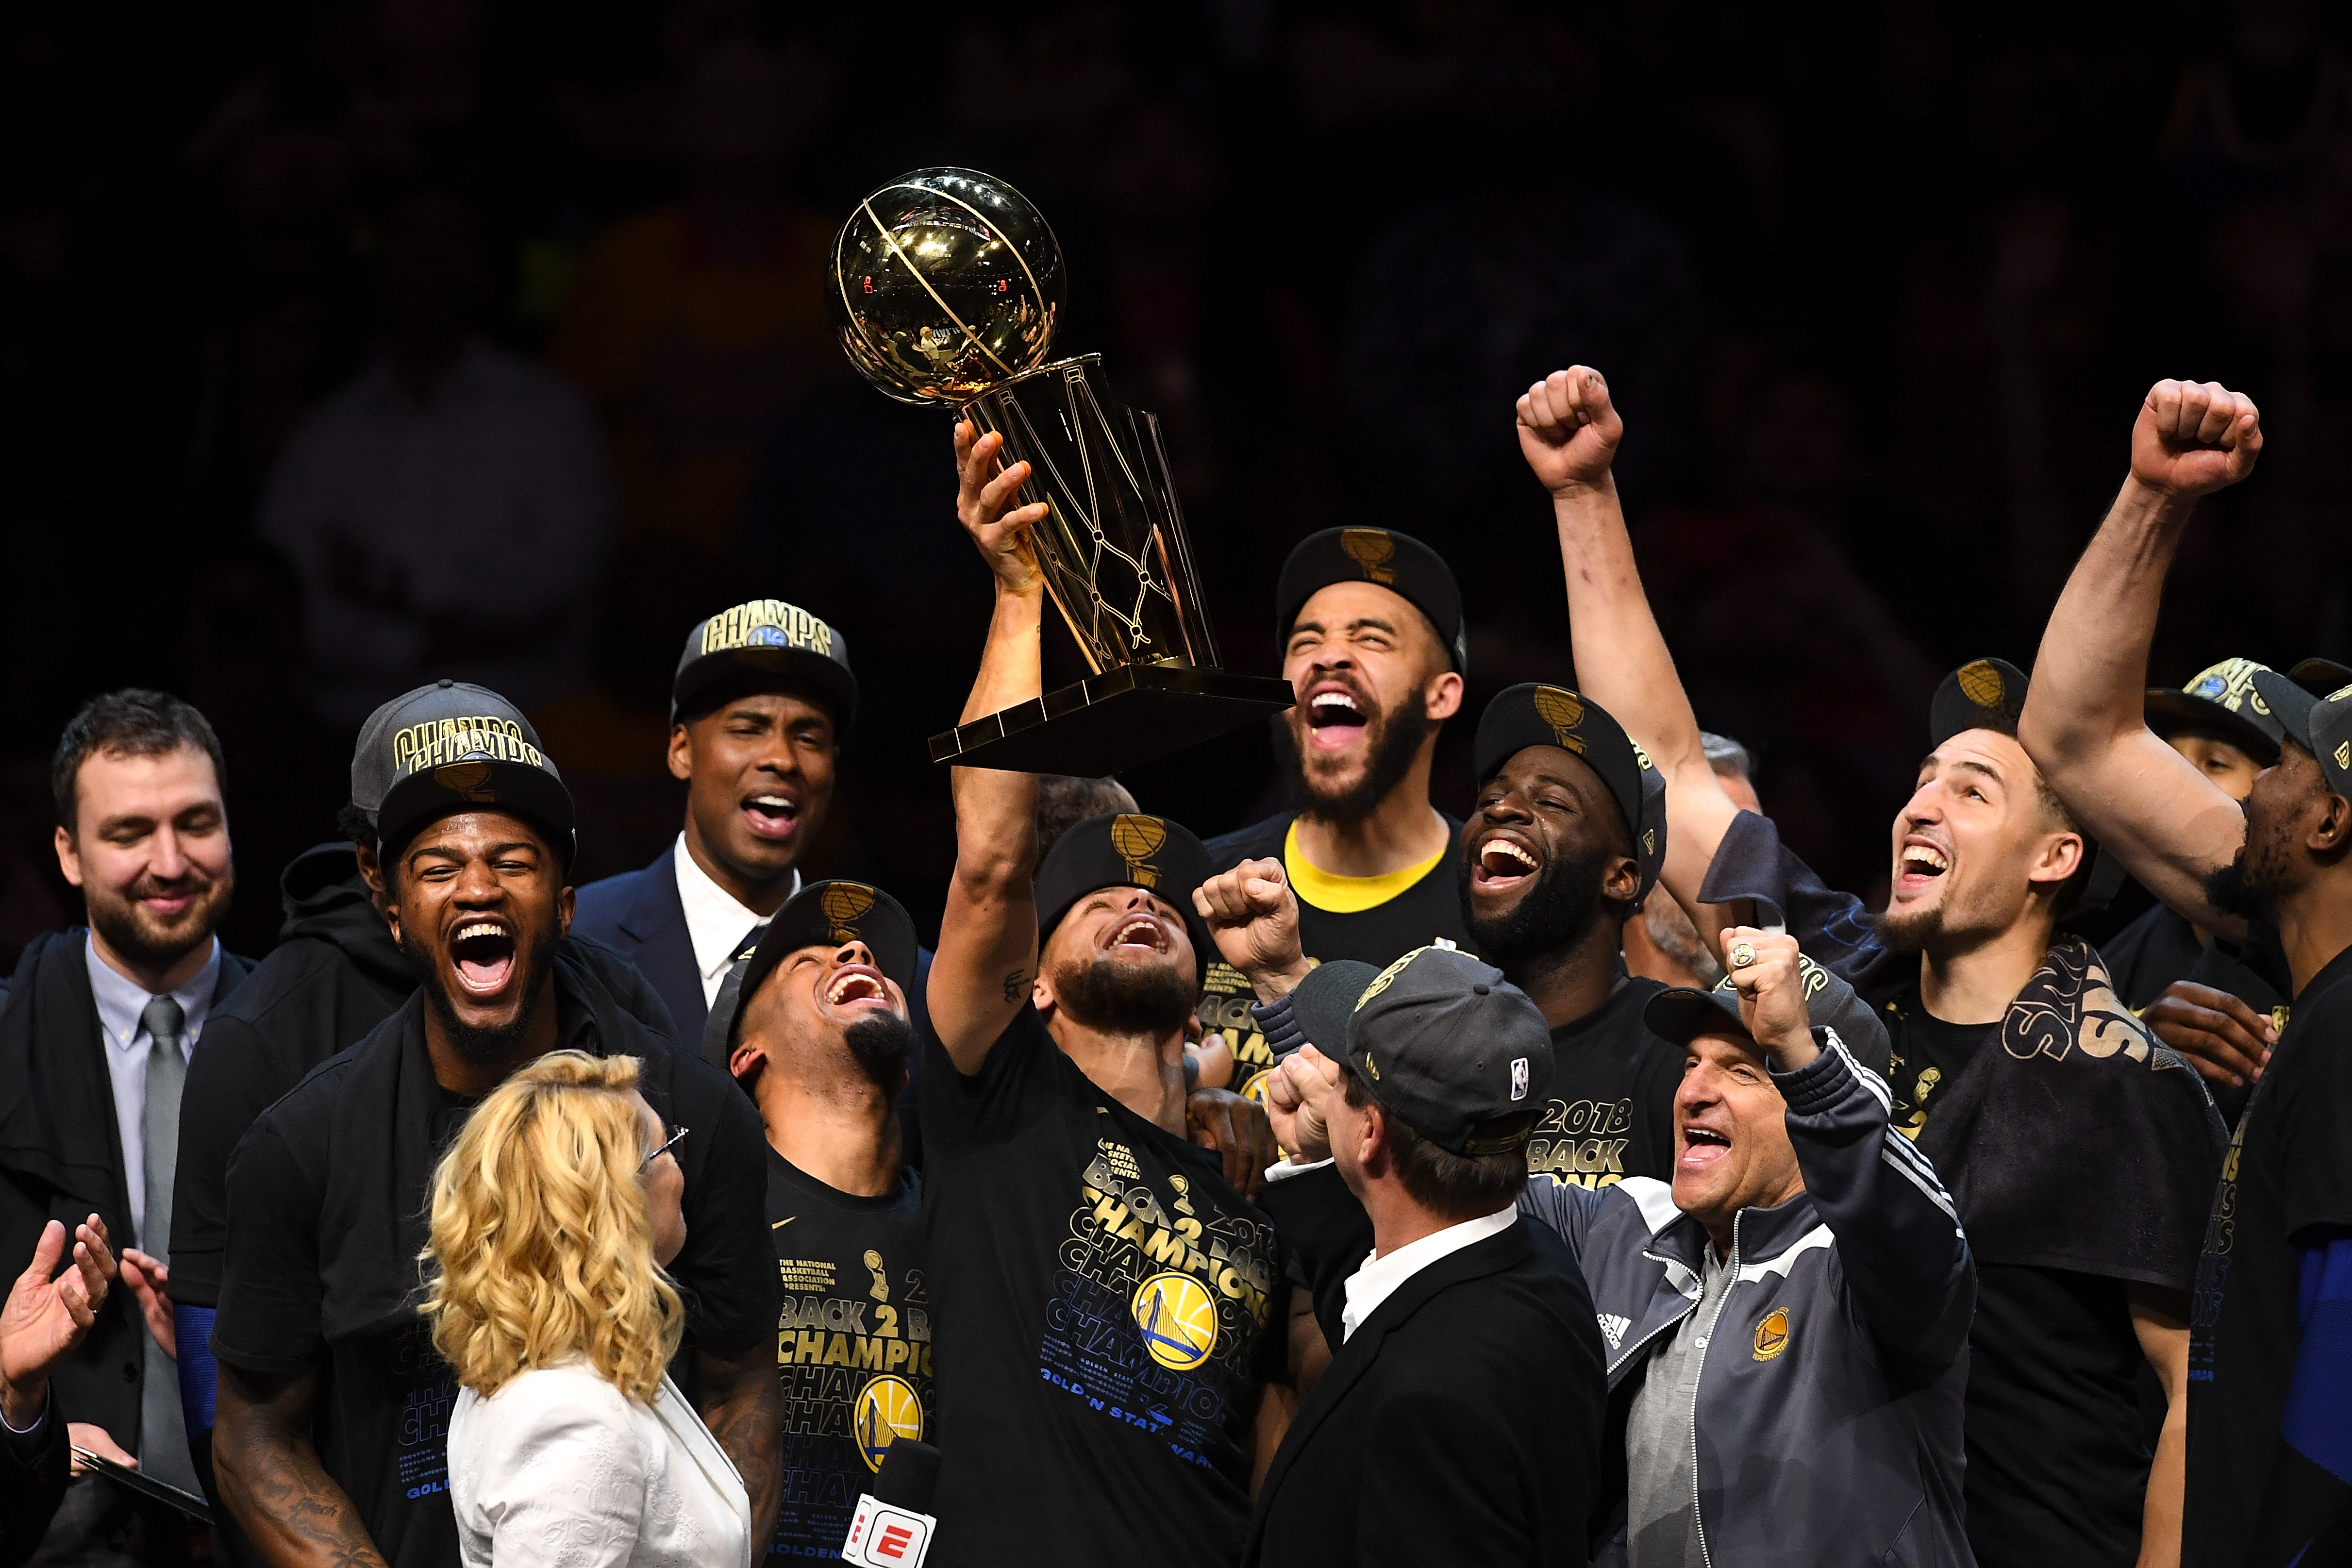 Warriors parade 2018: Date, time, other info as known for NBA